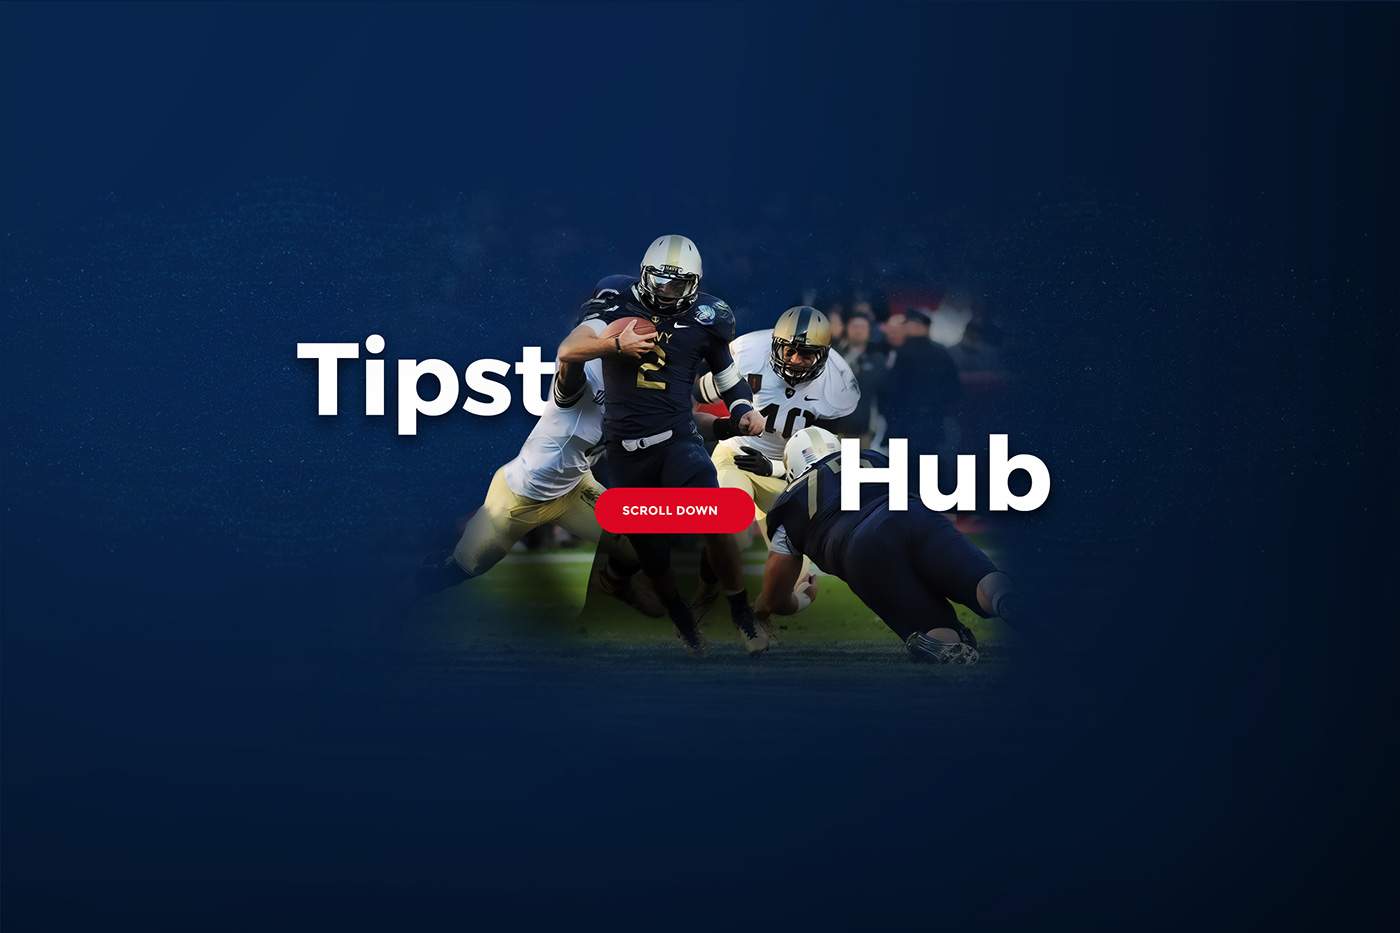 sport tips bet basketball american football nfl repiano tipster sports